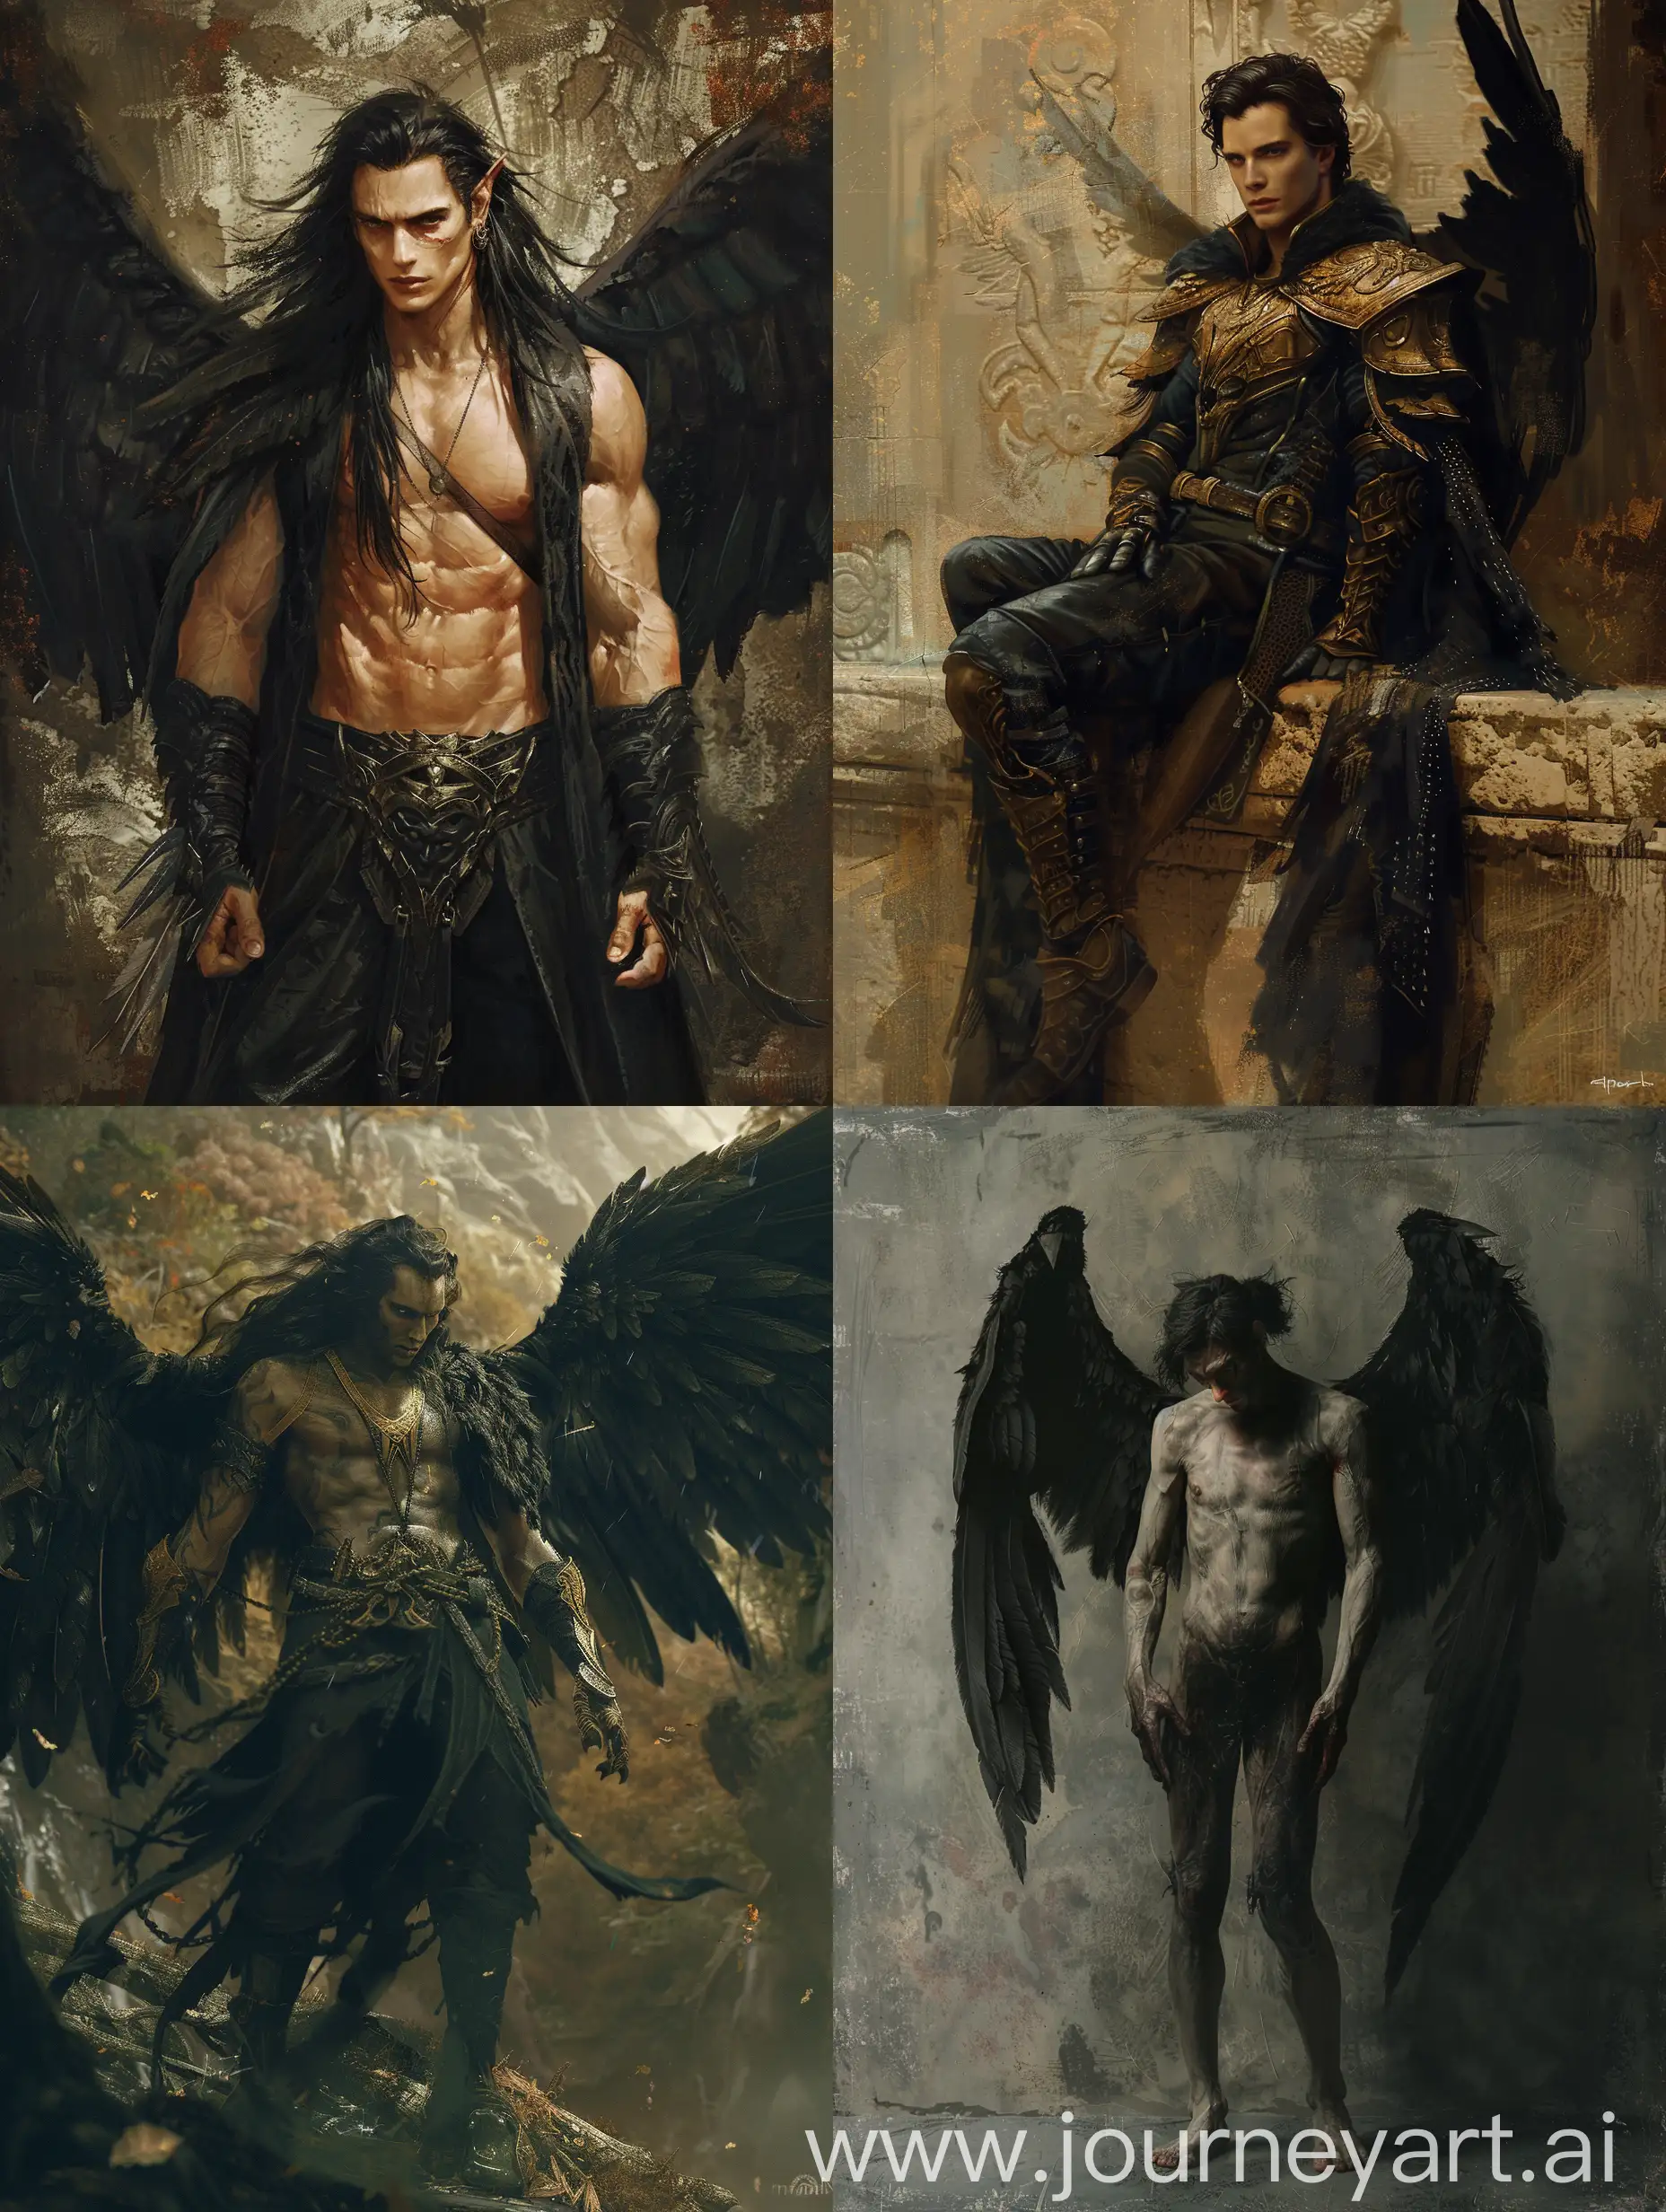 Lucifer-the-Imposing-Fallen-Angel-with-Glowing-Eyes-and-Black-Wings